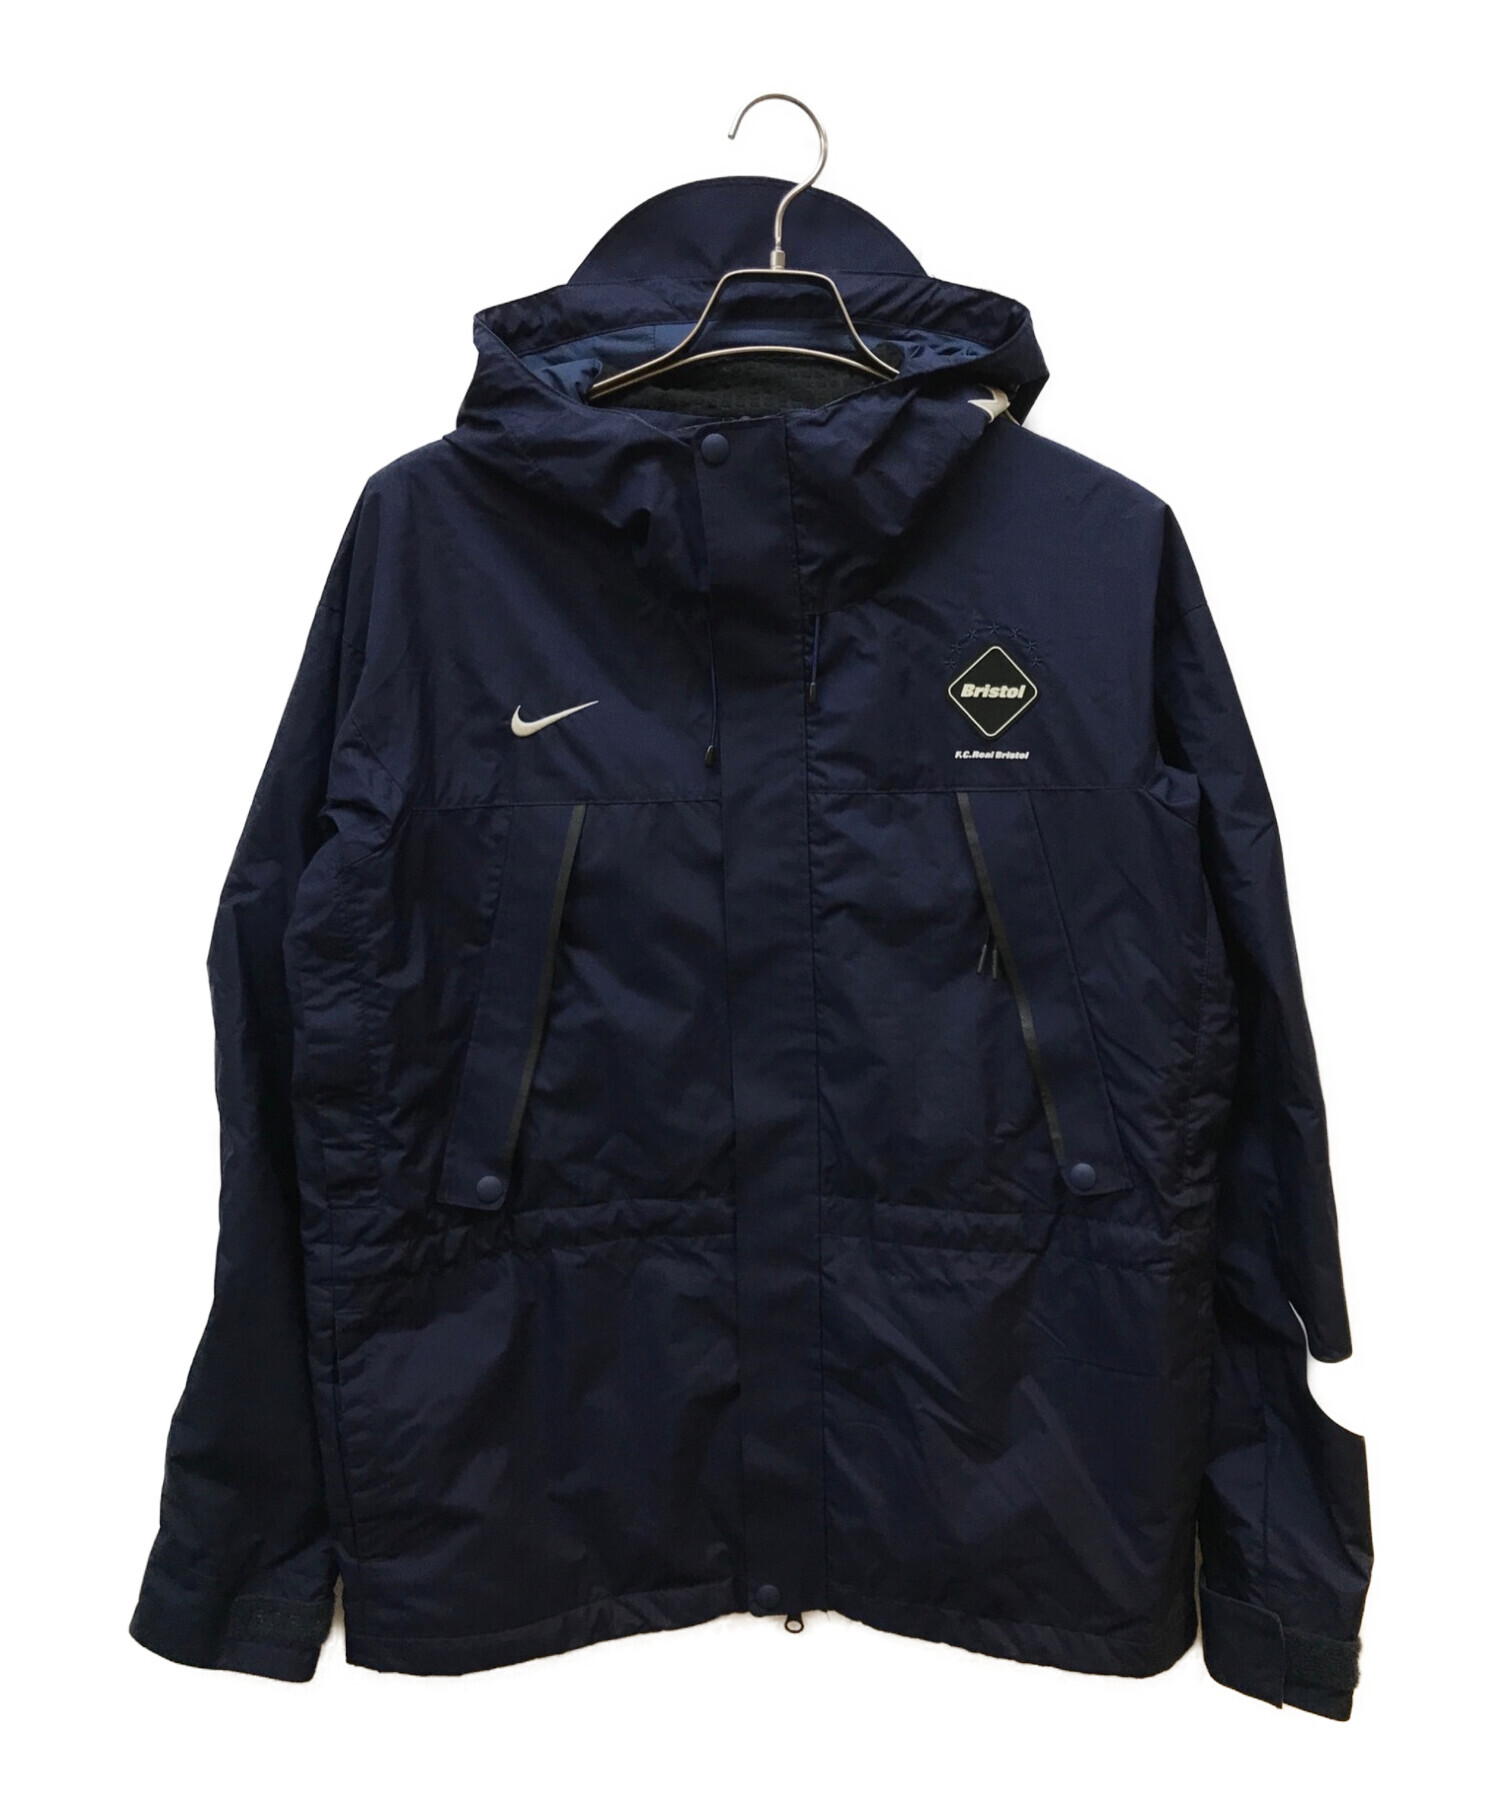 FCRB NIKE STORM-FIT JACKET | camillevieraservices.com